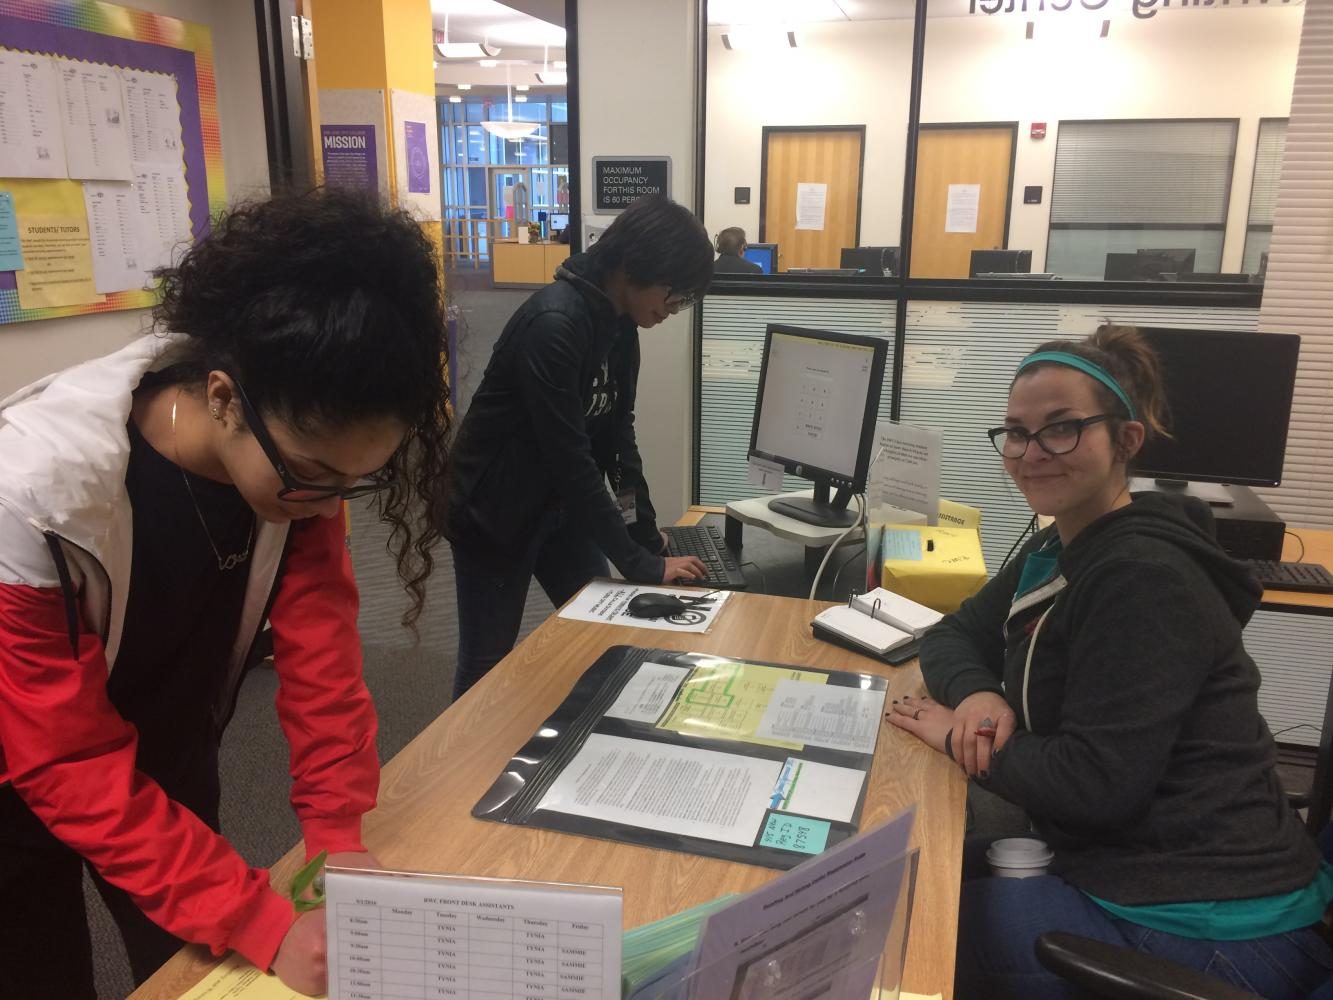 (Left) Peer tutors at the RWC Noor Basma, Lauren Apostle and Sammie Gilmore demonstrate how to sign in for a tutoring session.